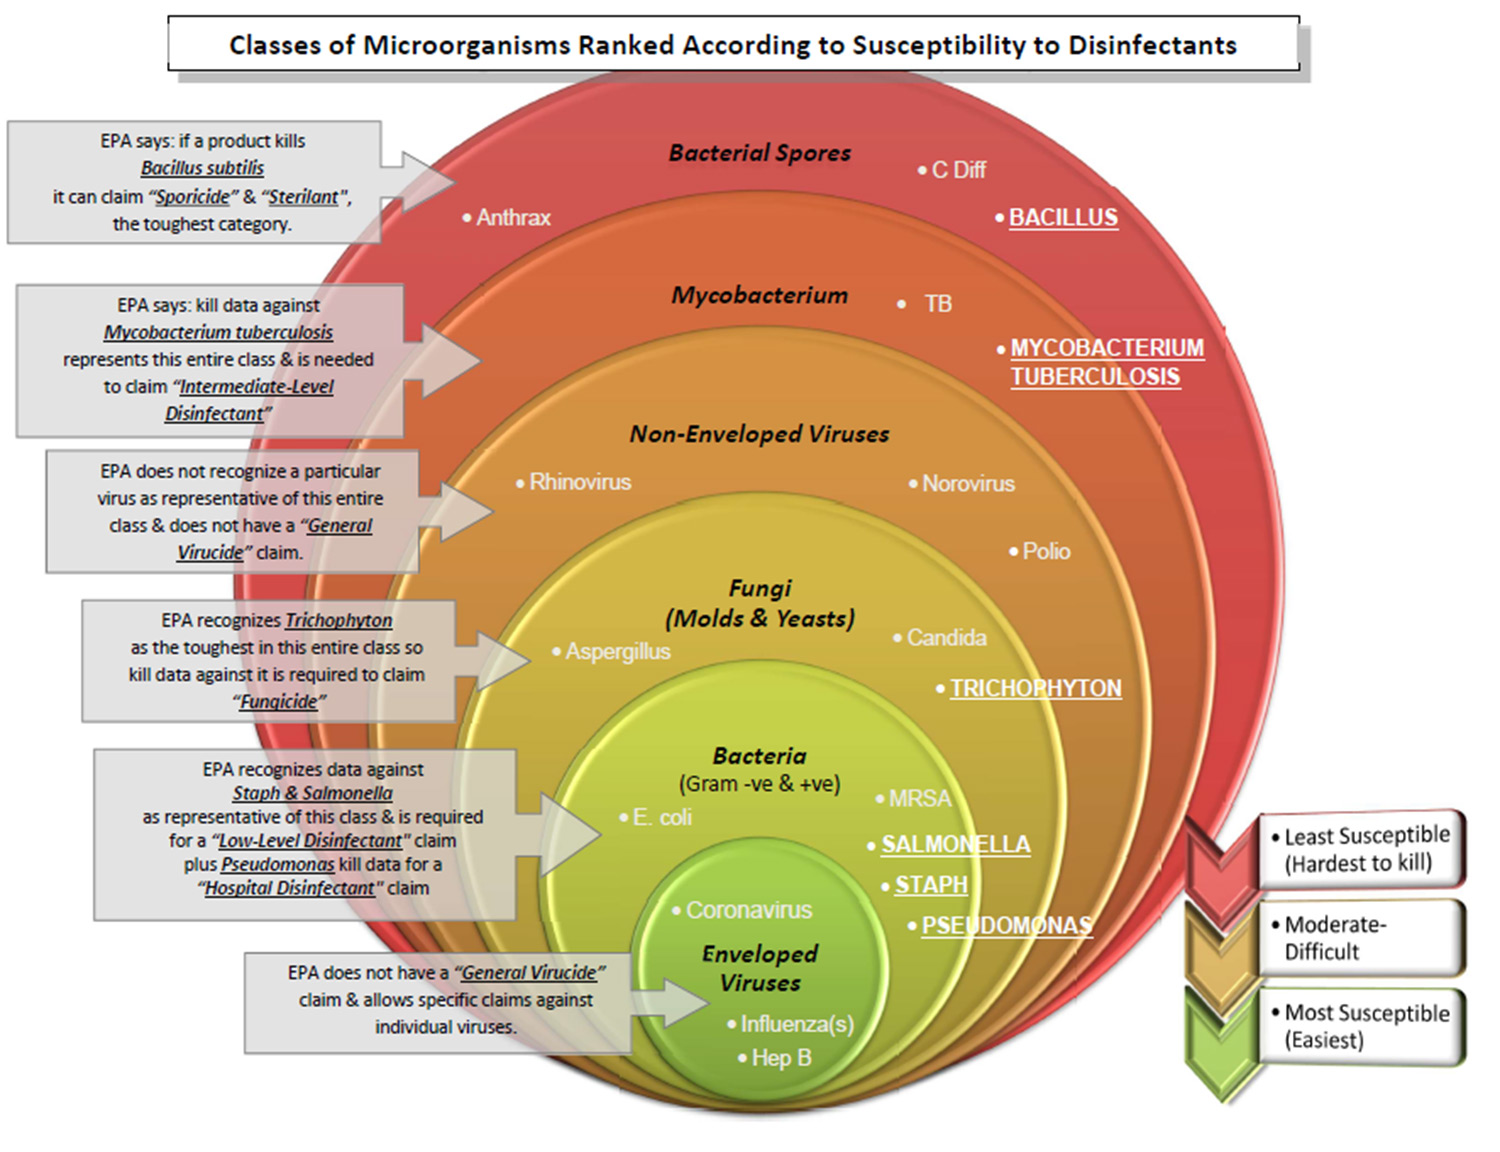 Infographic showing classes of microorganisms ranked according to susceptibility to disinfectants